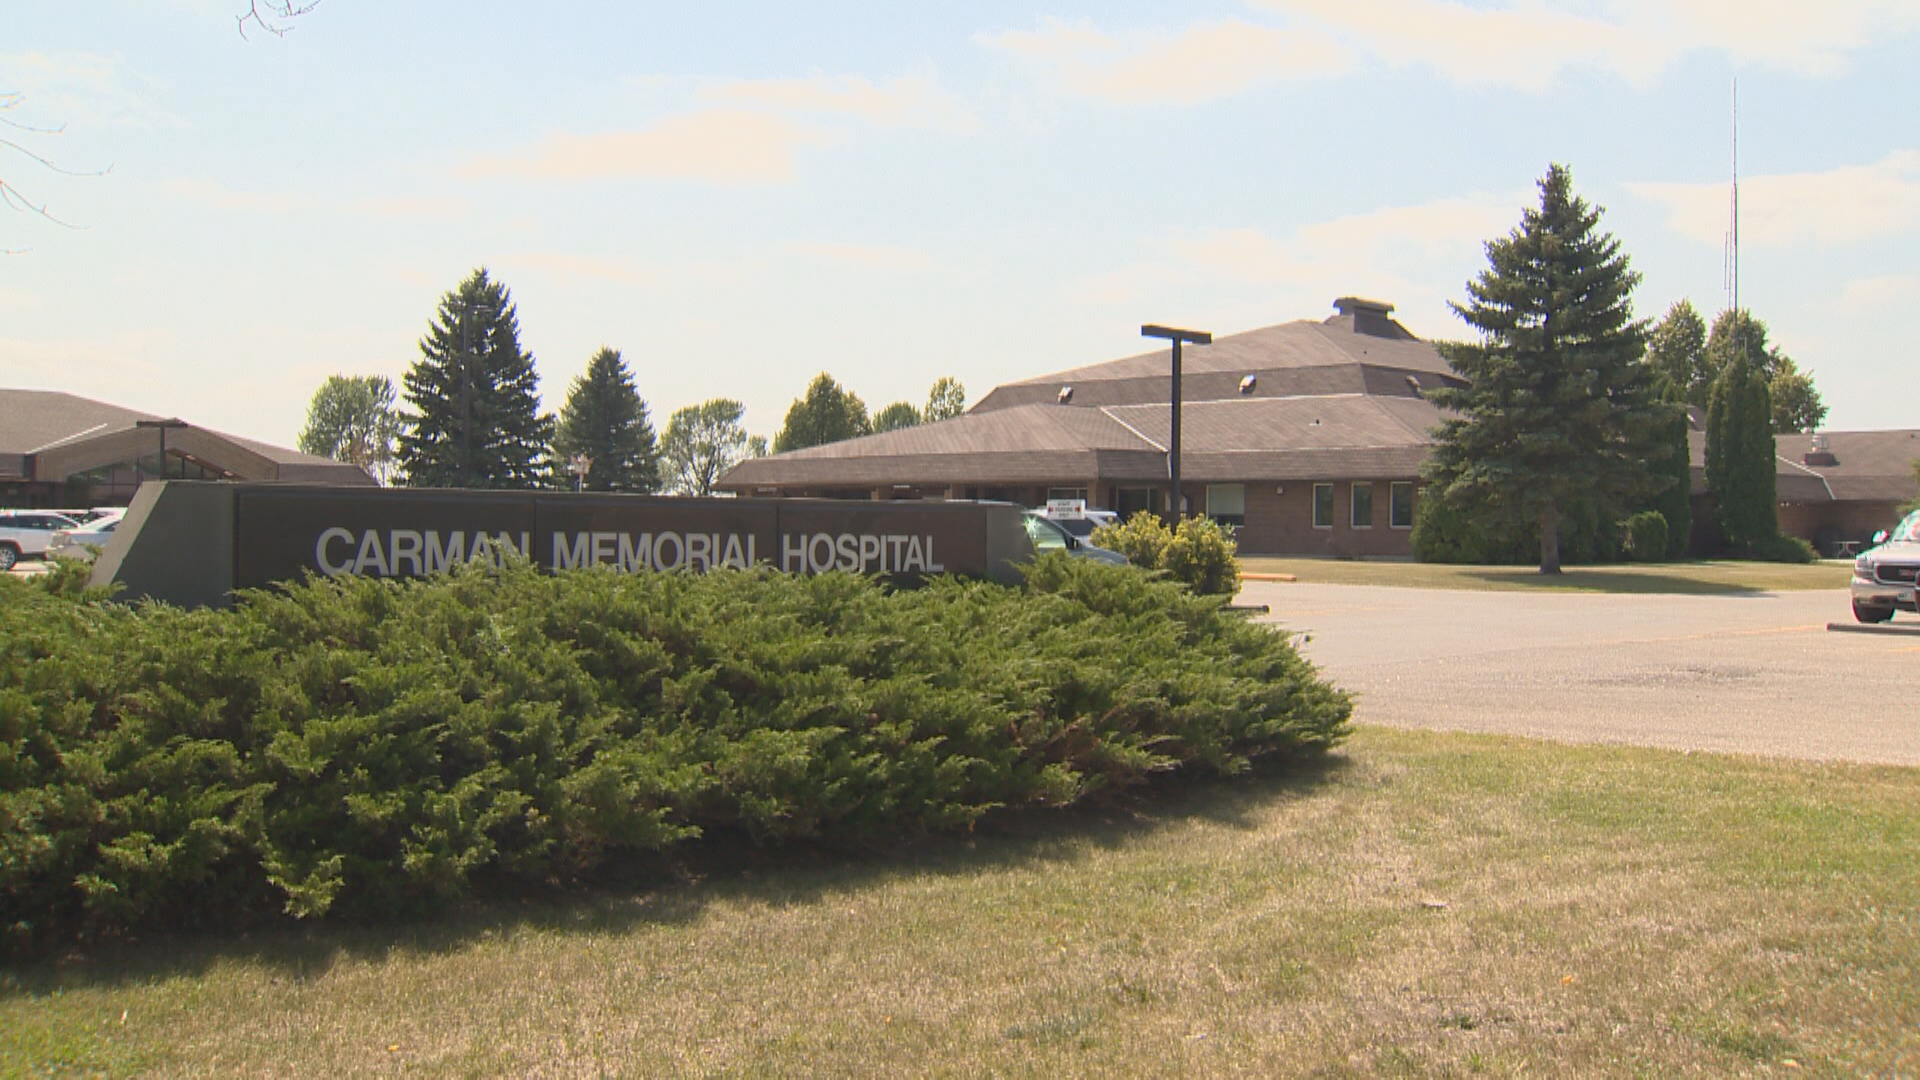 Manitoba's Carman Memorial Hospital is expected to be closed for at least a month while upgrades to the facility's heating and ventilation systems are completed.